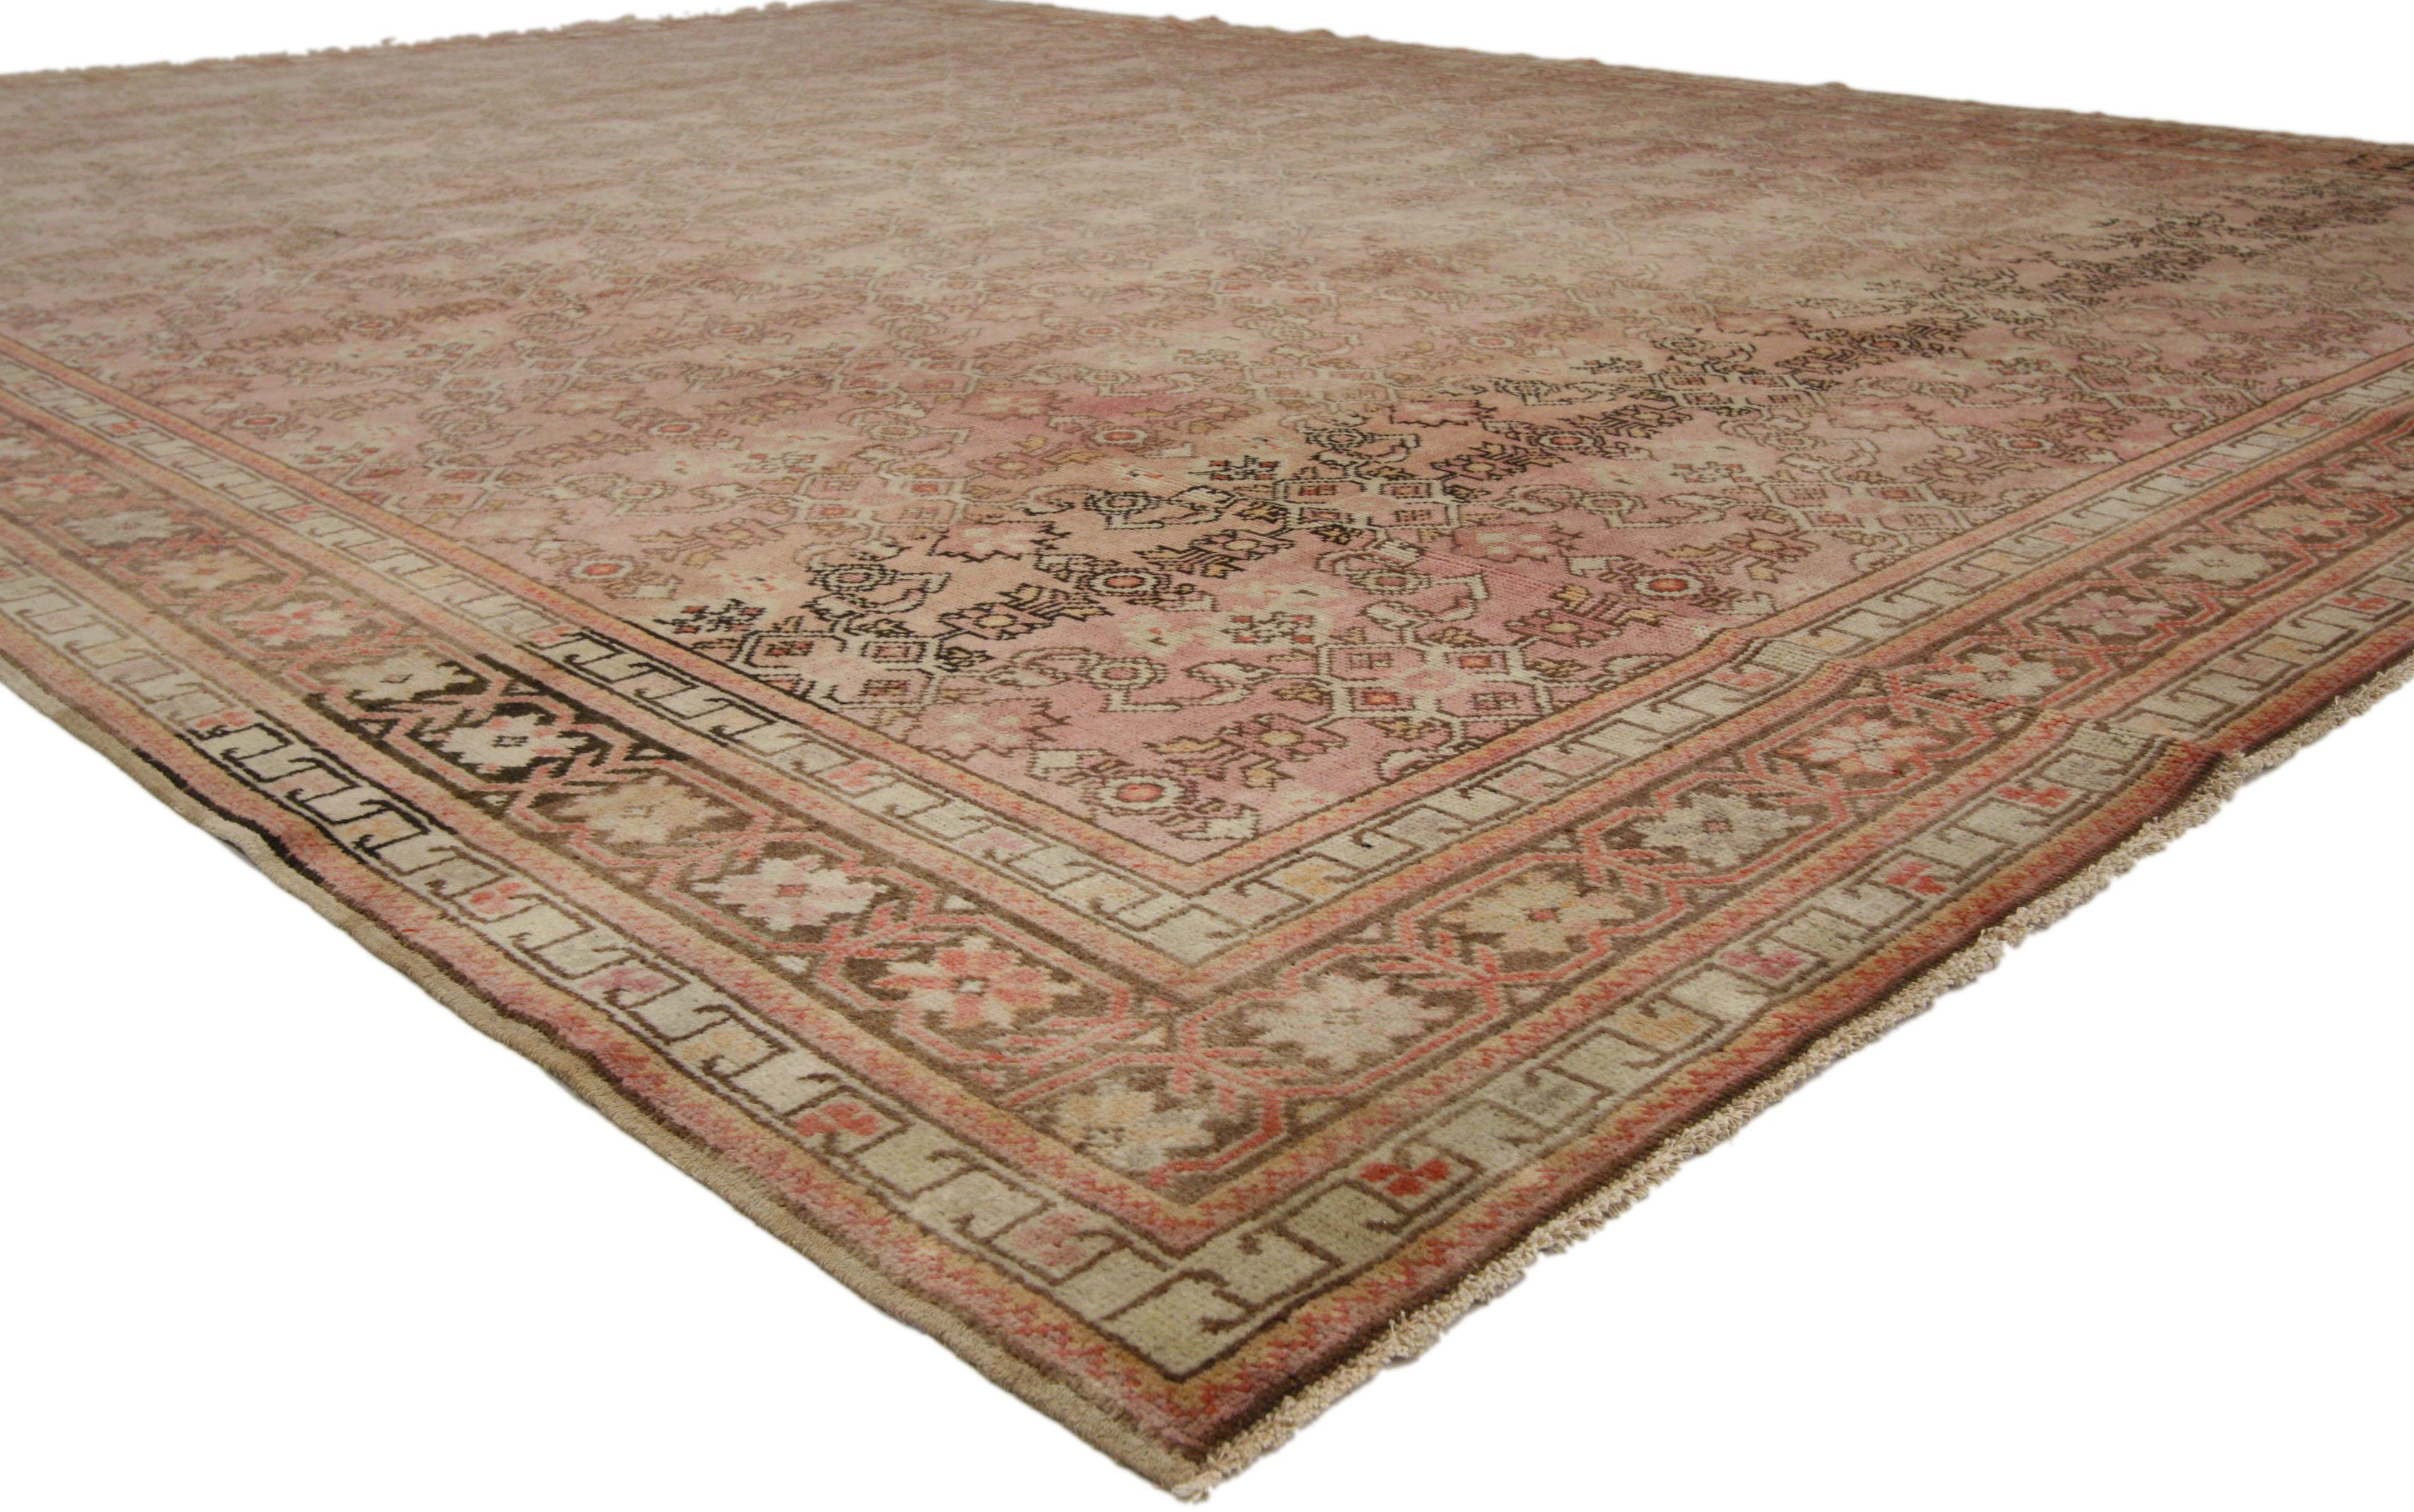 Vintage Turkish Oushak Area Rug with French Provincial Style In Good Condition For Sale In Dallas, TX